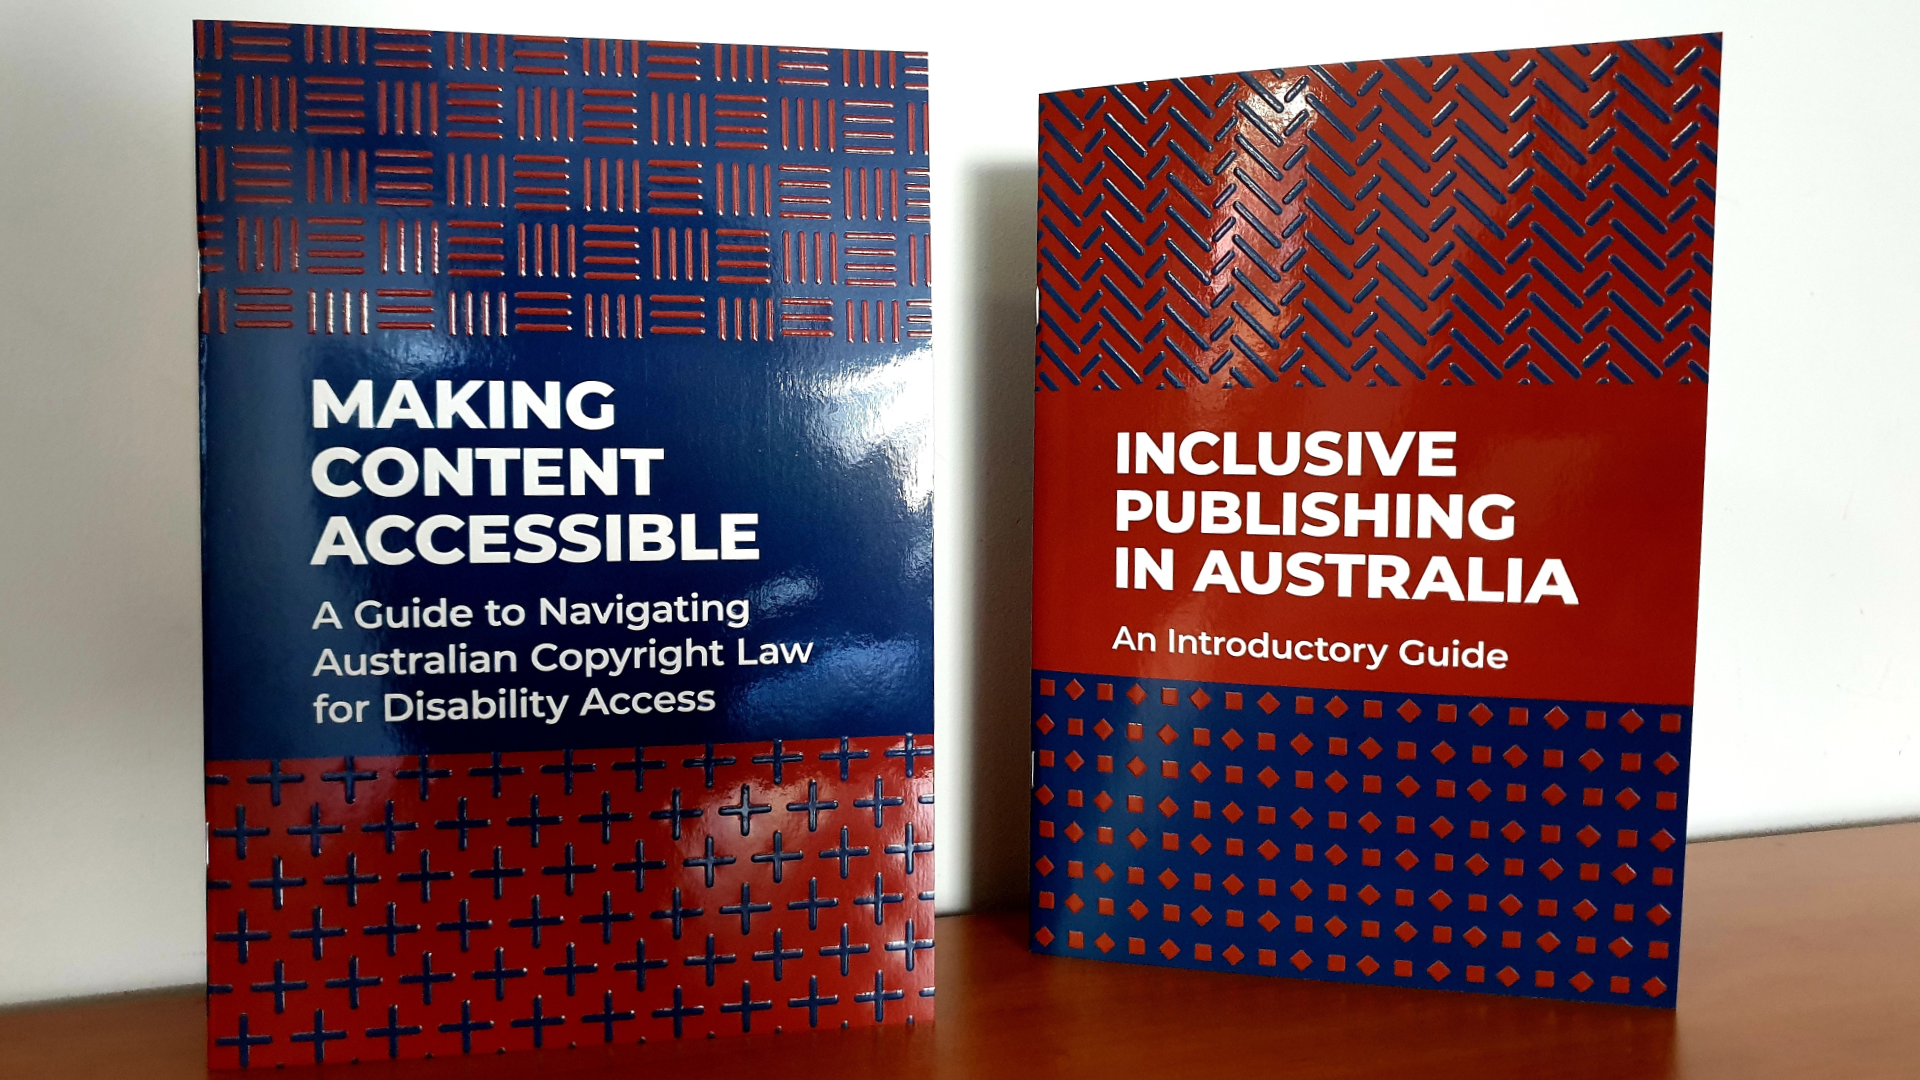 A photo of two Inclusive Publishing guides - Making Content Accessible and Inclusive Publishing in Australia